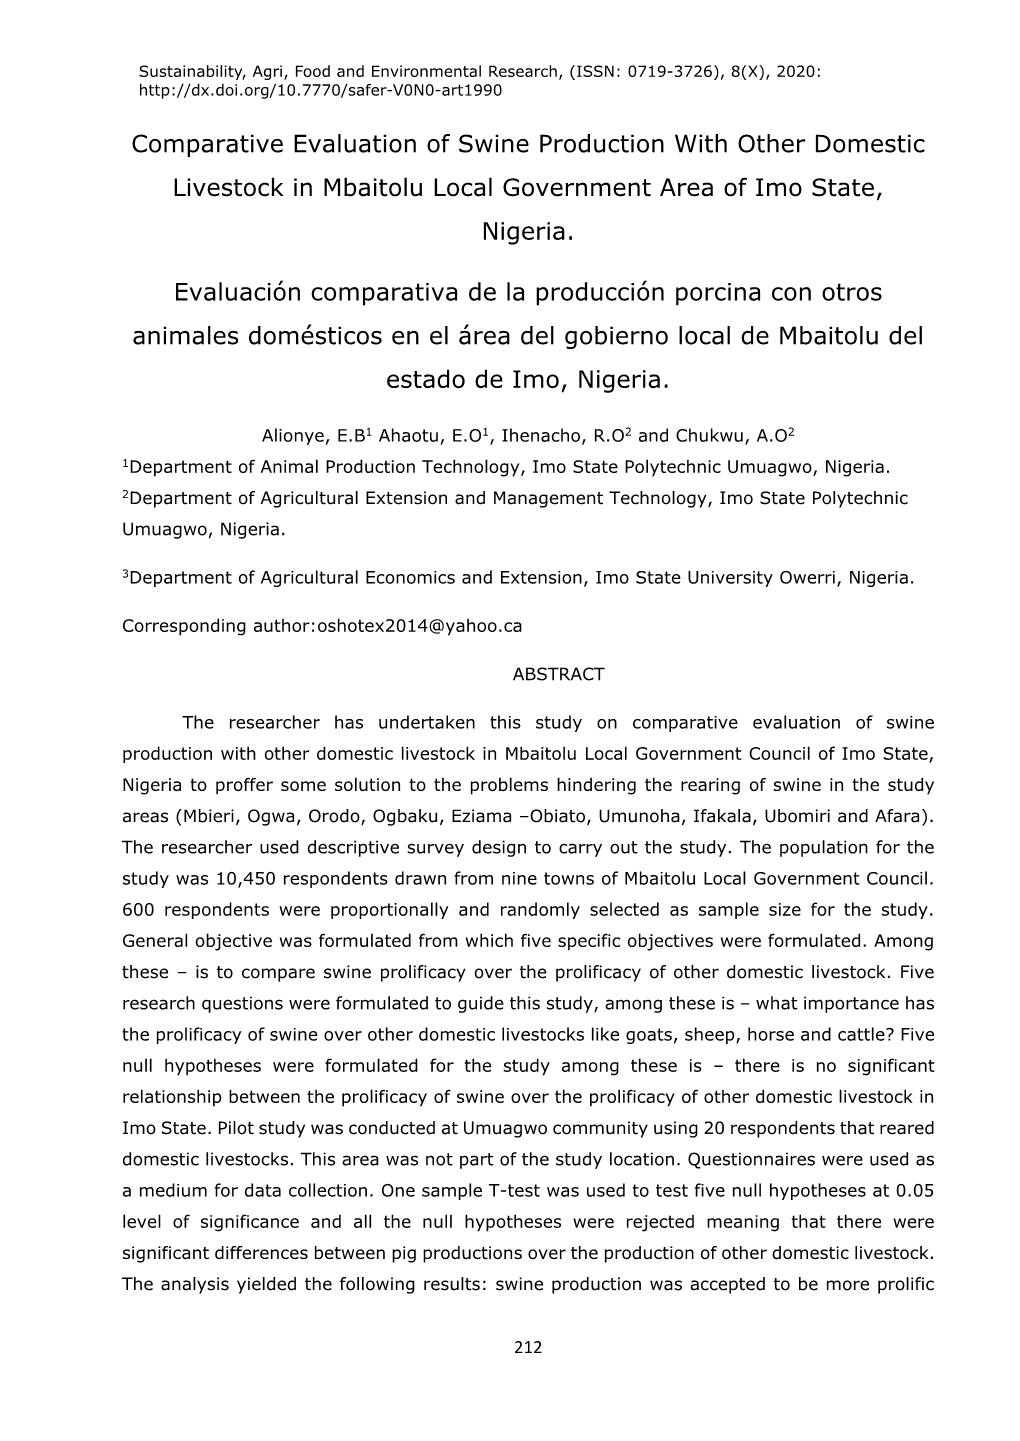 Comparative Evaluation of Swine Production with Other Domestic Livestock in Mbaitolu Local Government Area of Imo State, Nigeria